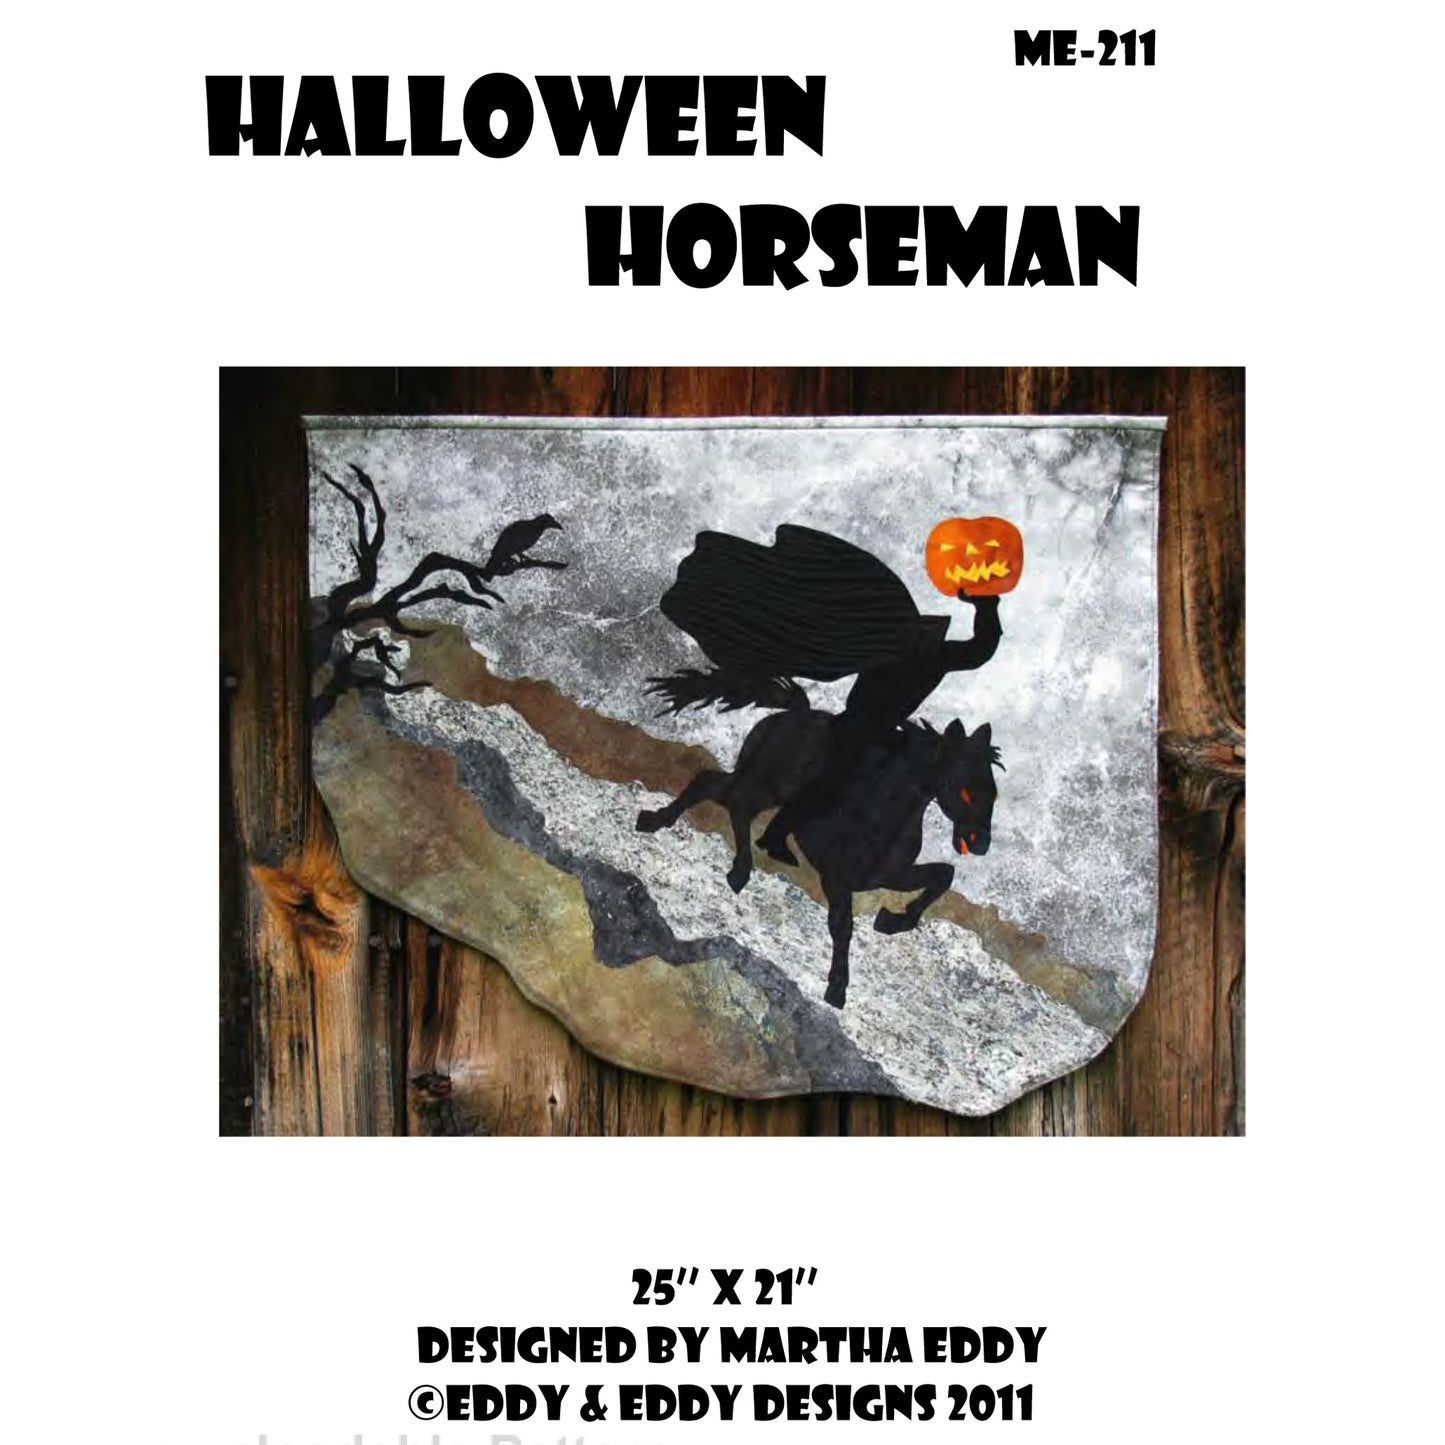 Cover image of pattern for Halloween Horseman Wall Hanging.